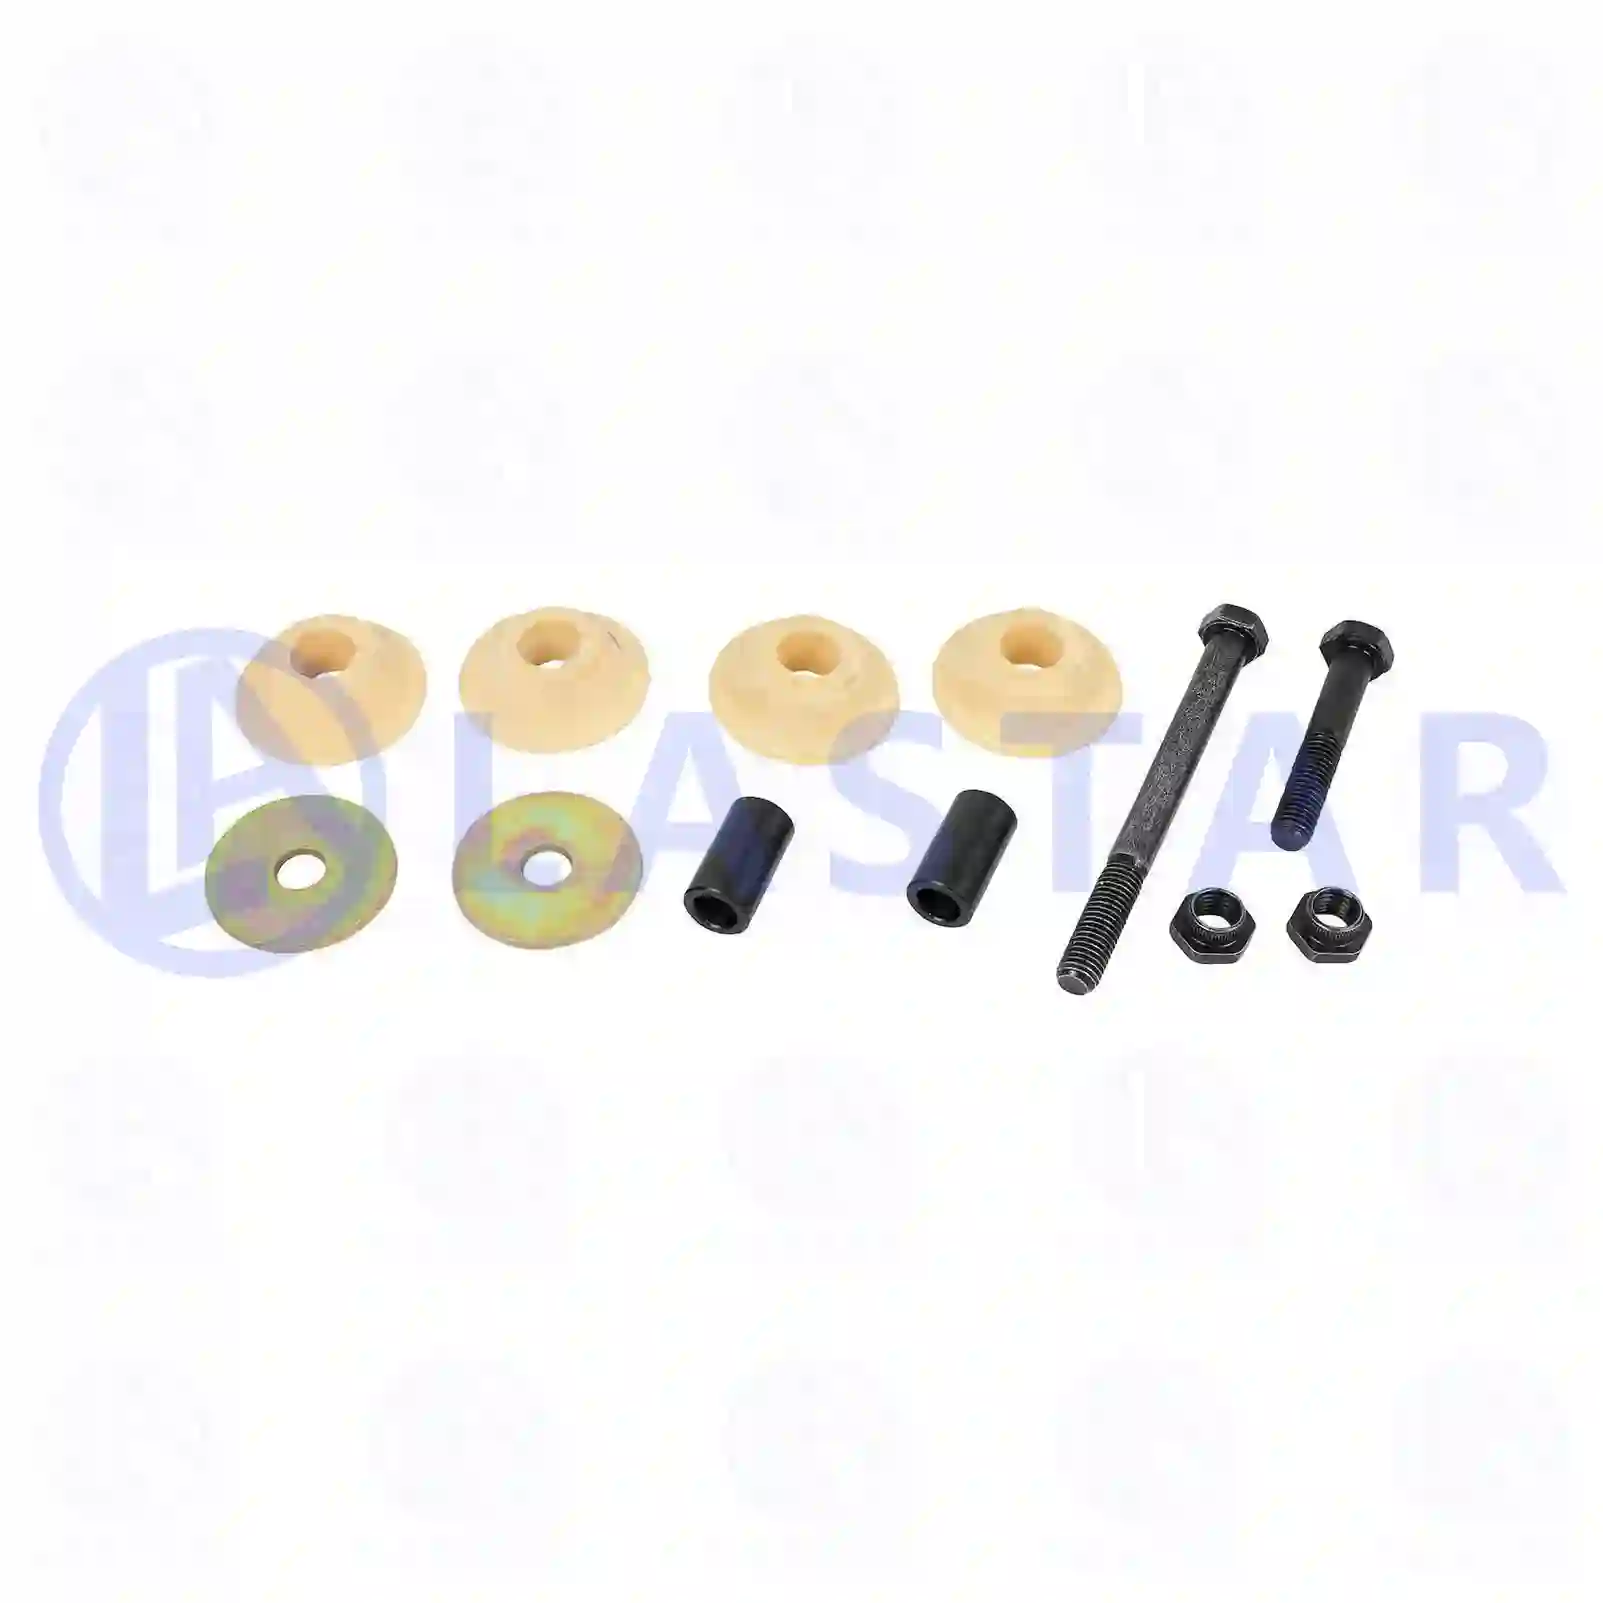 Mounting kit, 77736098, 1343134S1, 1481245S1, 1894408S1, ZG41307-0008 ||  77736098 Lastar Spare Part | Truck Spare Parts, Auotomotive Spare Parts Mounting kit, 77736098, 1343134S1, 1481245S1, 1894408S1, ZG41307-0008 ||  77736098 Lastar Spare Part | Truck Spare Parts, Auotomotive Spare Parts